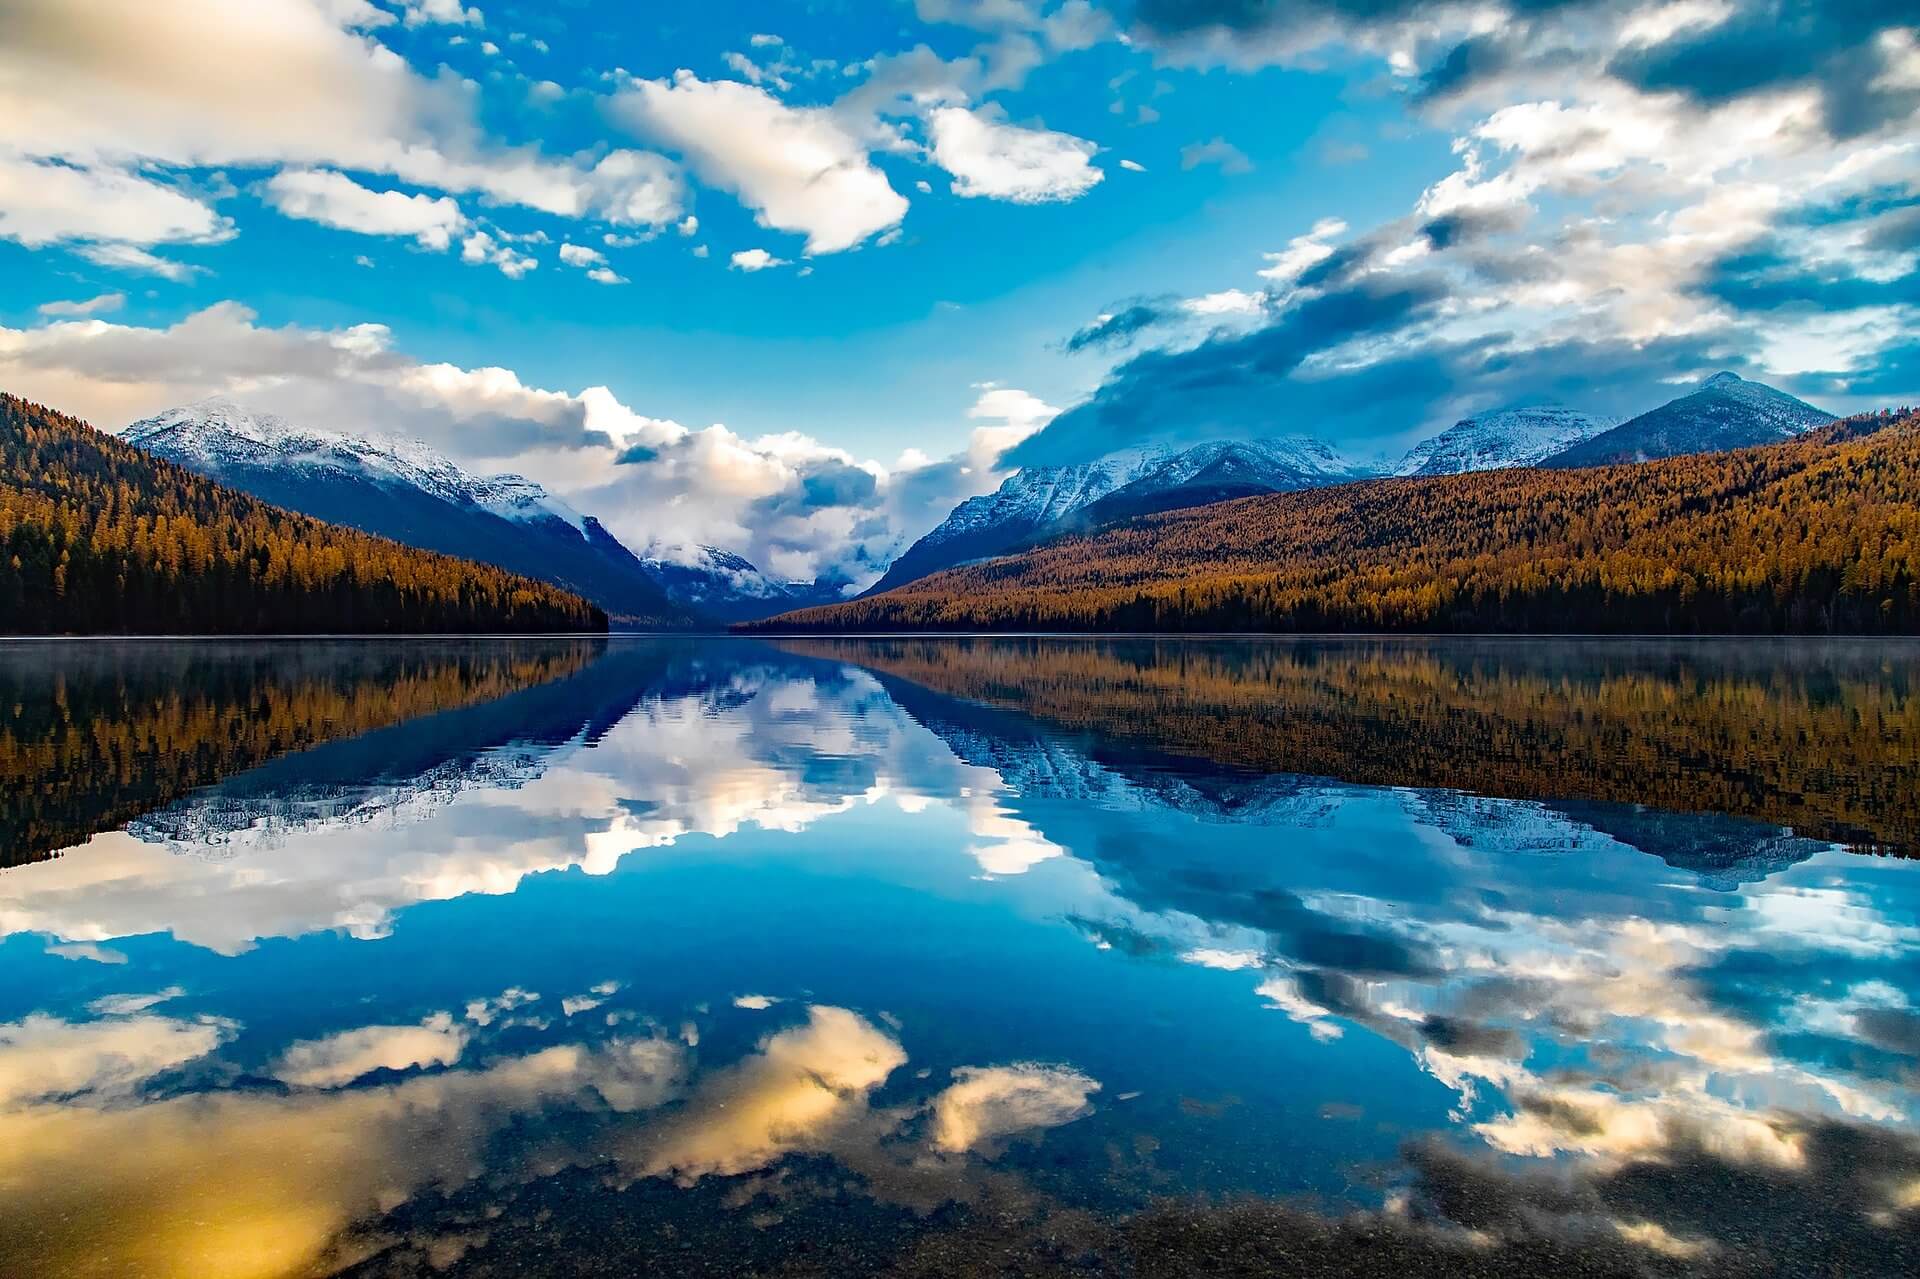 Lake MacDonald in Montana reflecting the sky and clouds